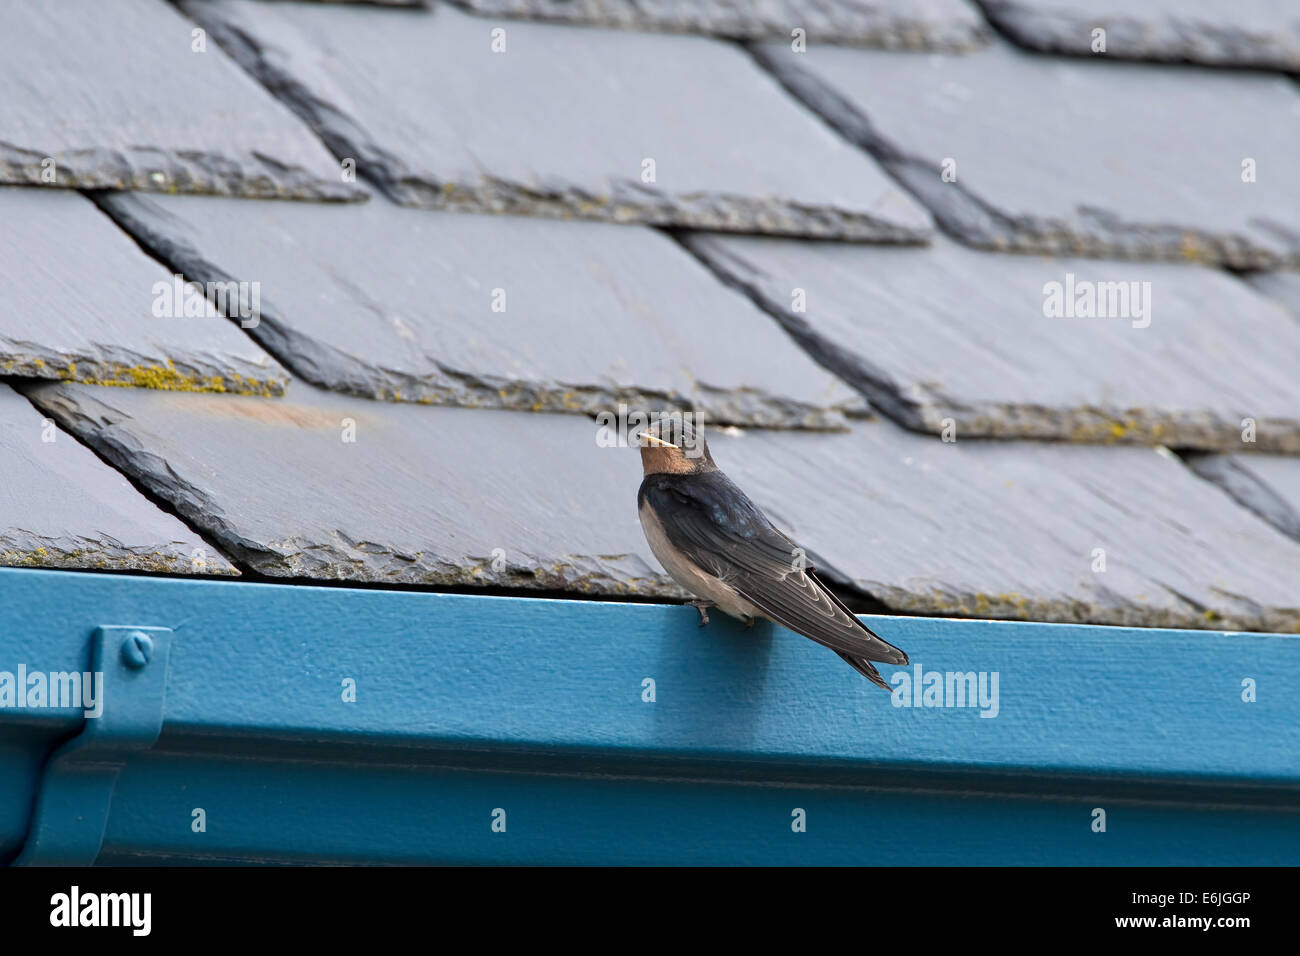 Juvenile swallow Hirundo Rustica perched on a gutter during August in the U.K. Stock Photo